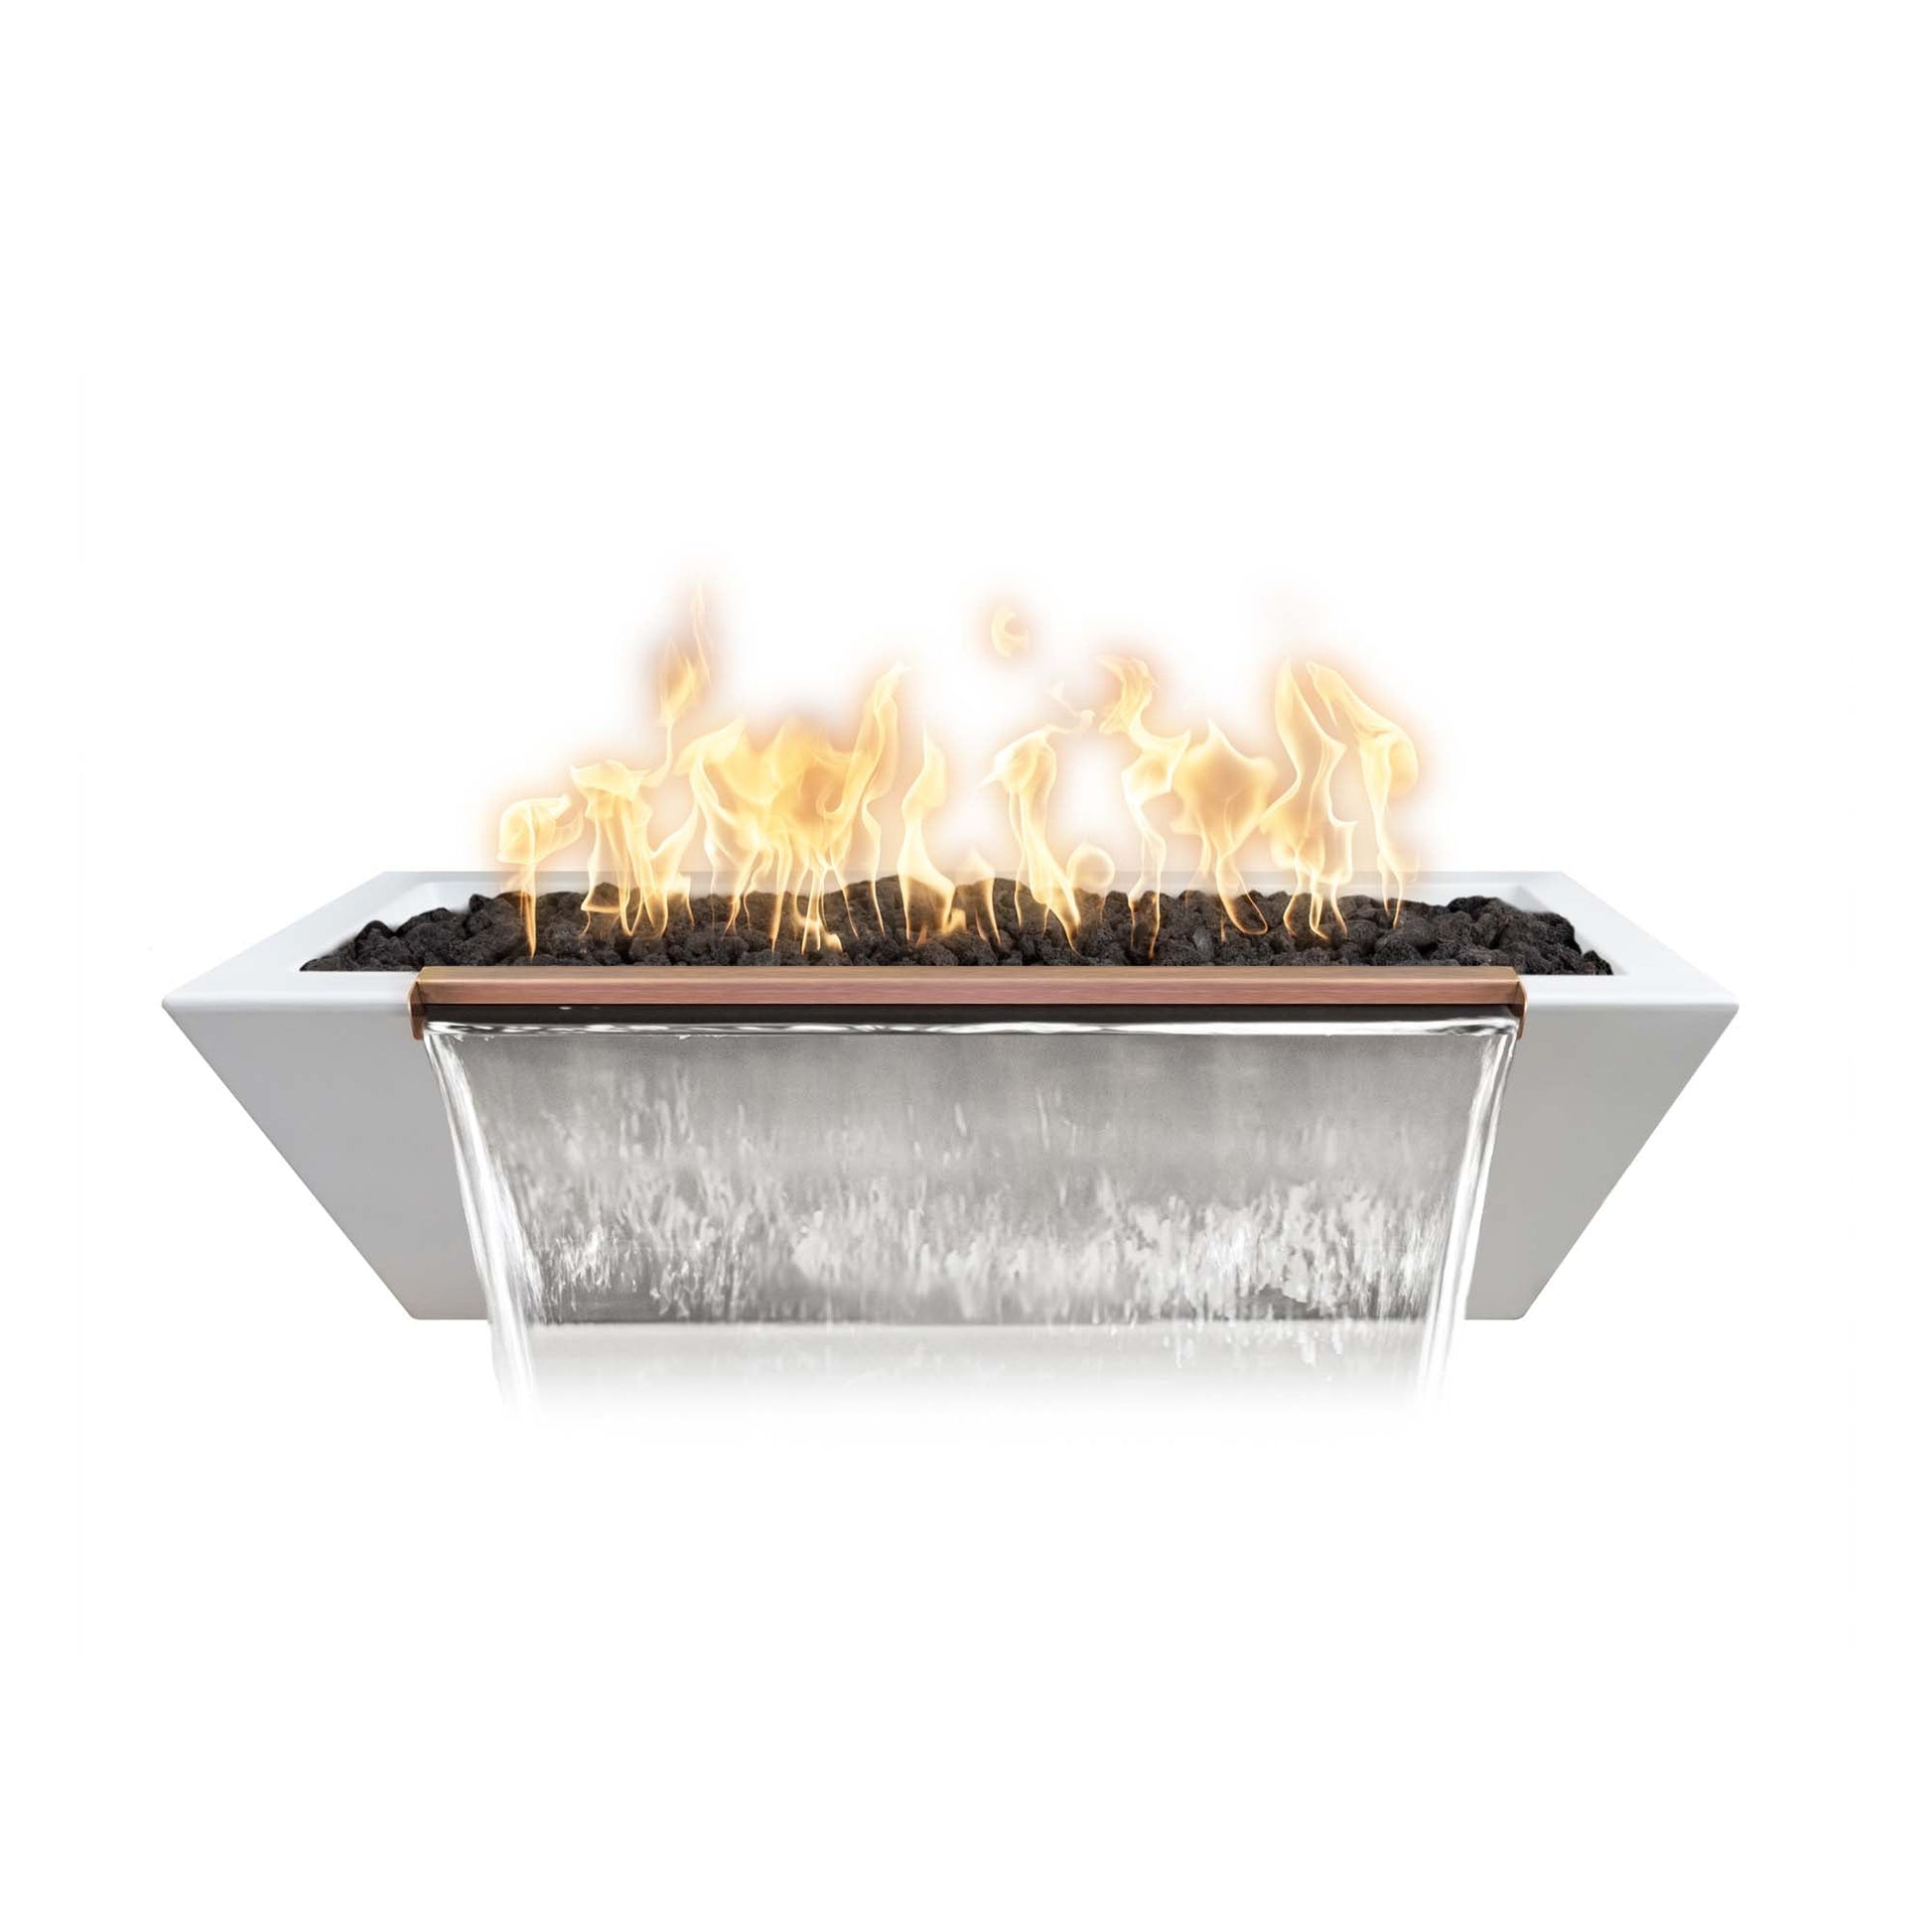 The Outdoor Plus Linear Maya 60" Vanilla GFRC Concrete Liquid Propane Fire & Water Bowl with Match Lit Ignition